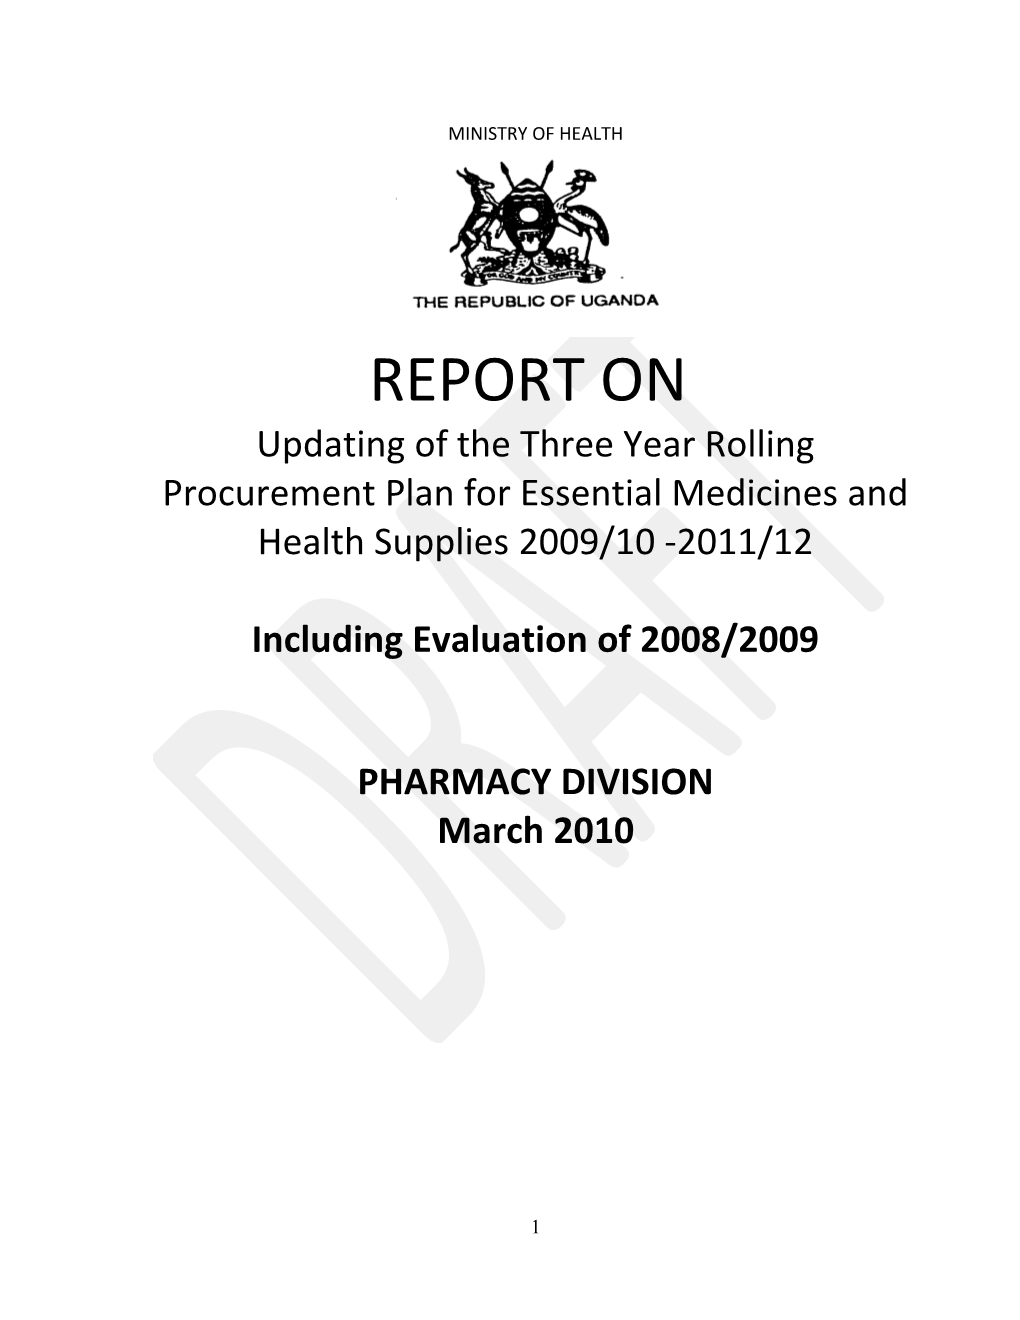 The Three Year Rolling Procurement Plan for Essential Medicines and Health Supplies